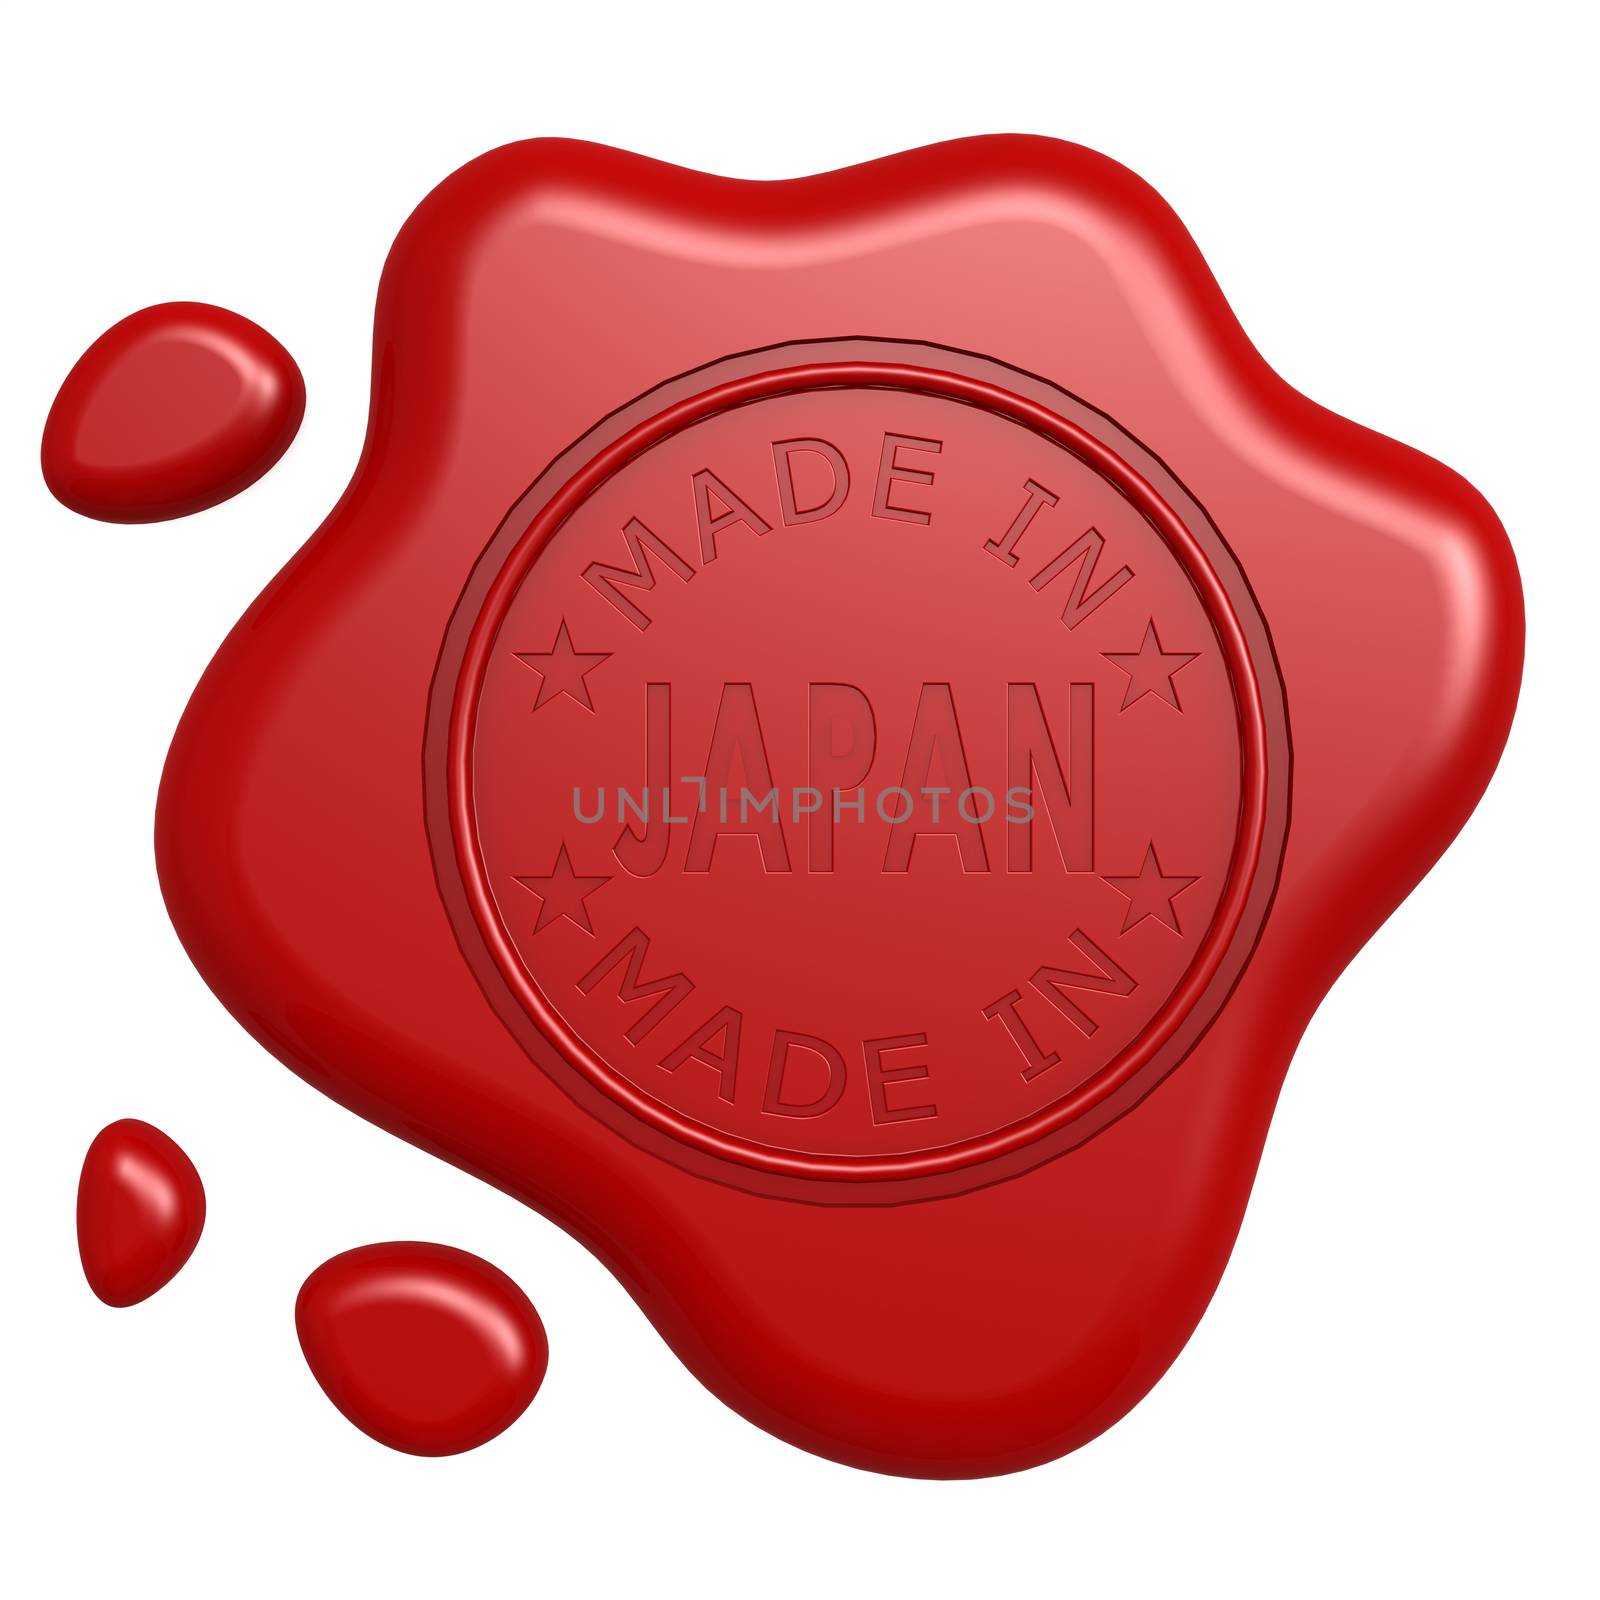 Made in Japan seal